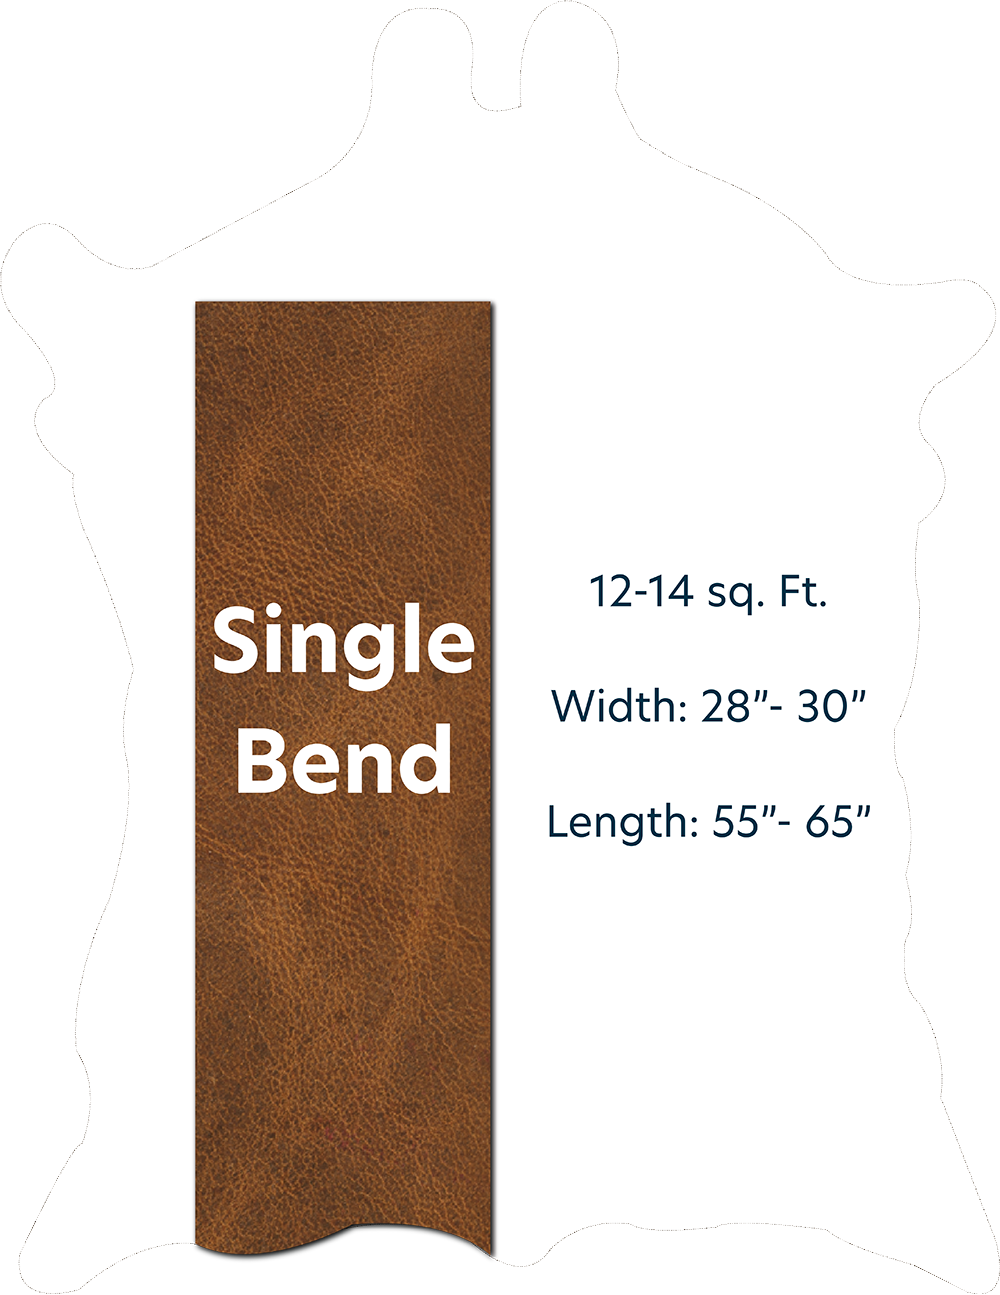 Single Bend with Dimensions